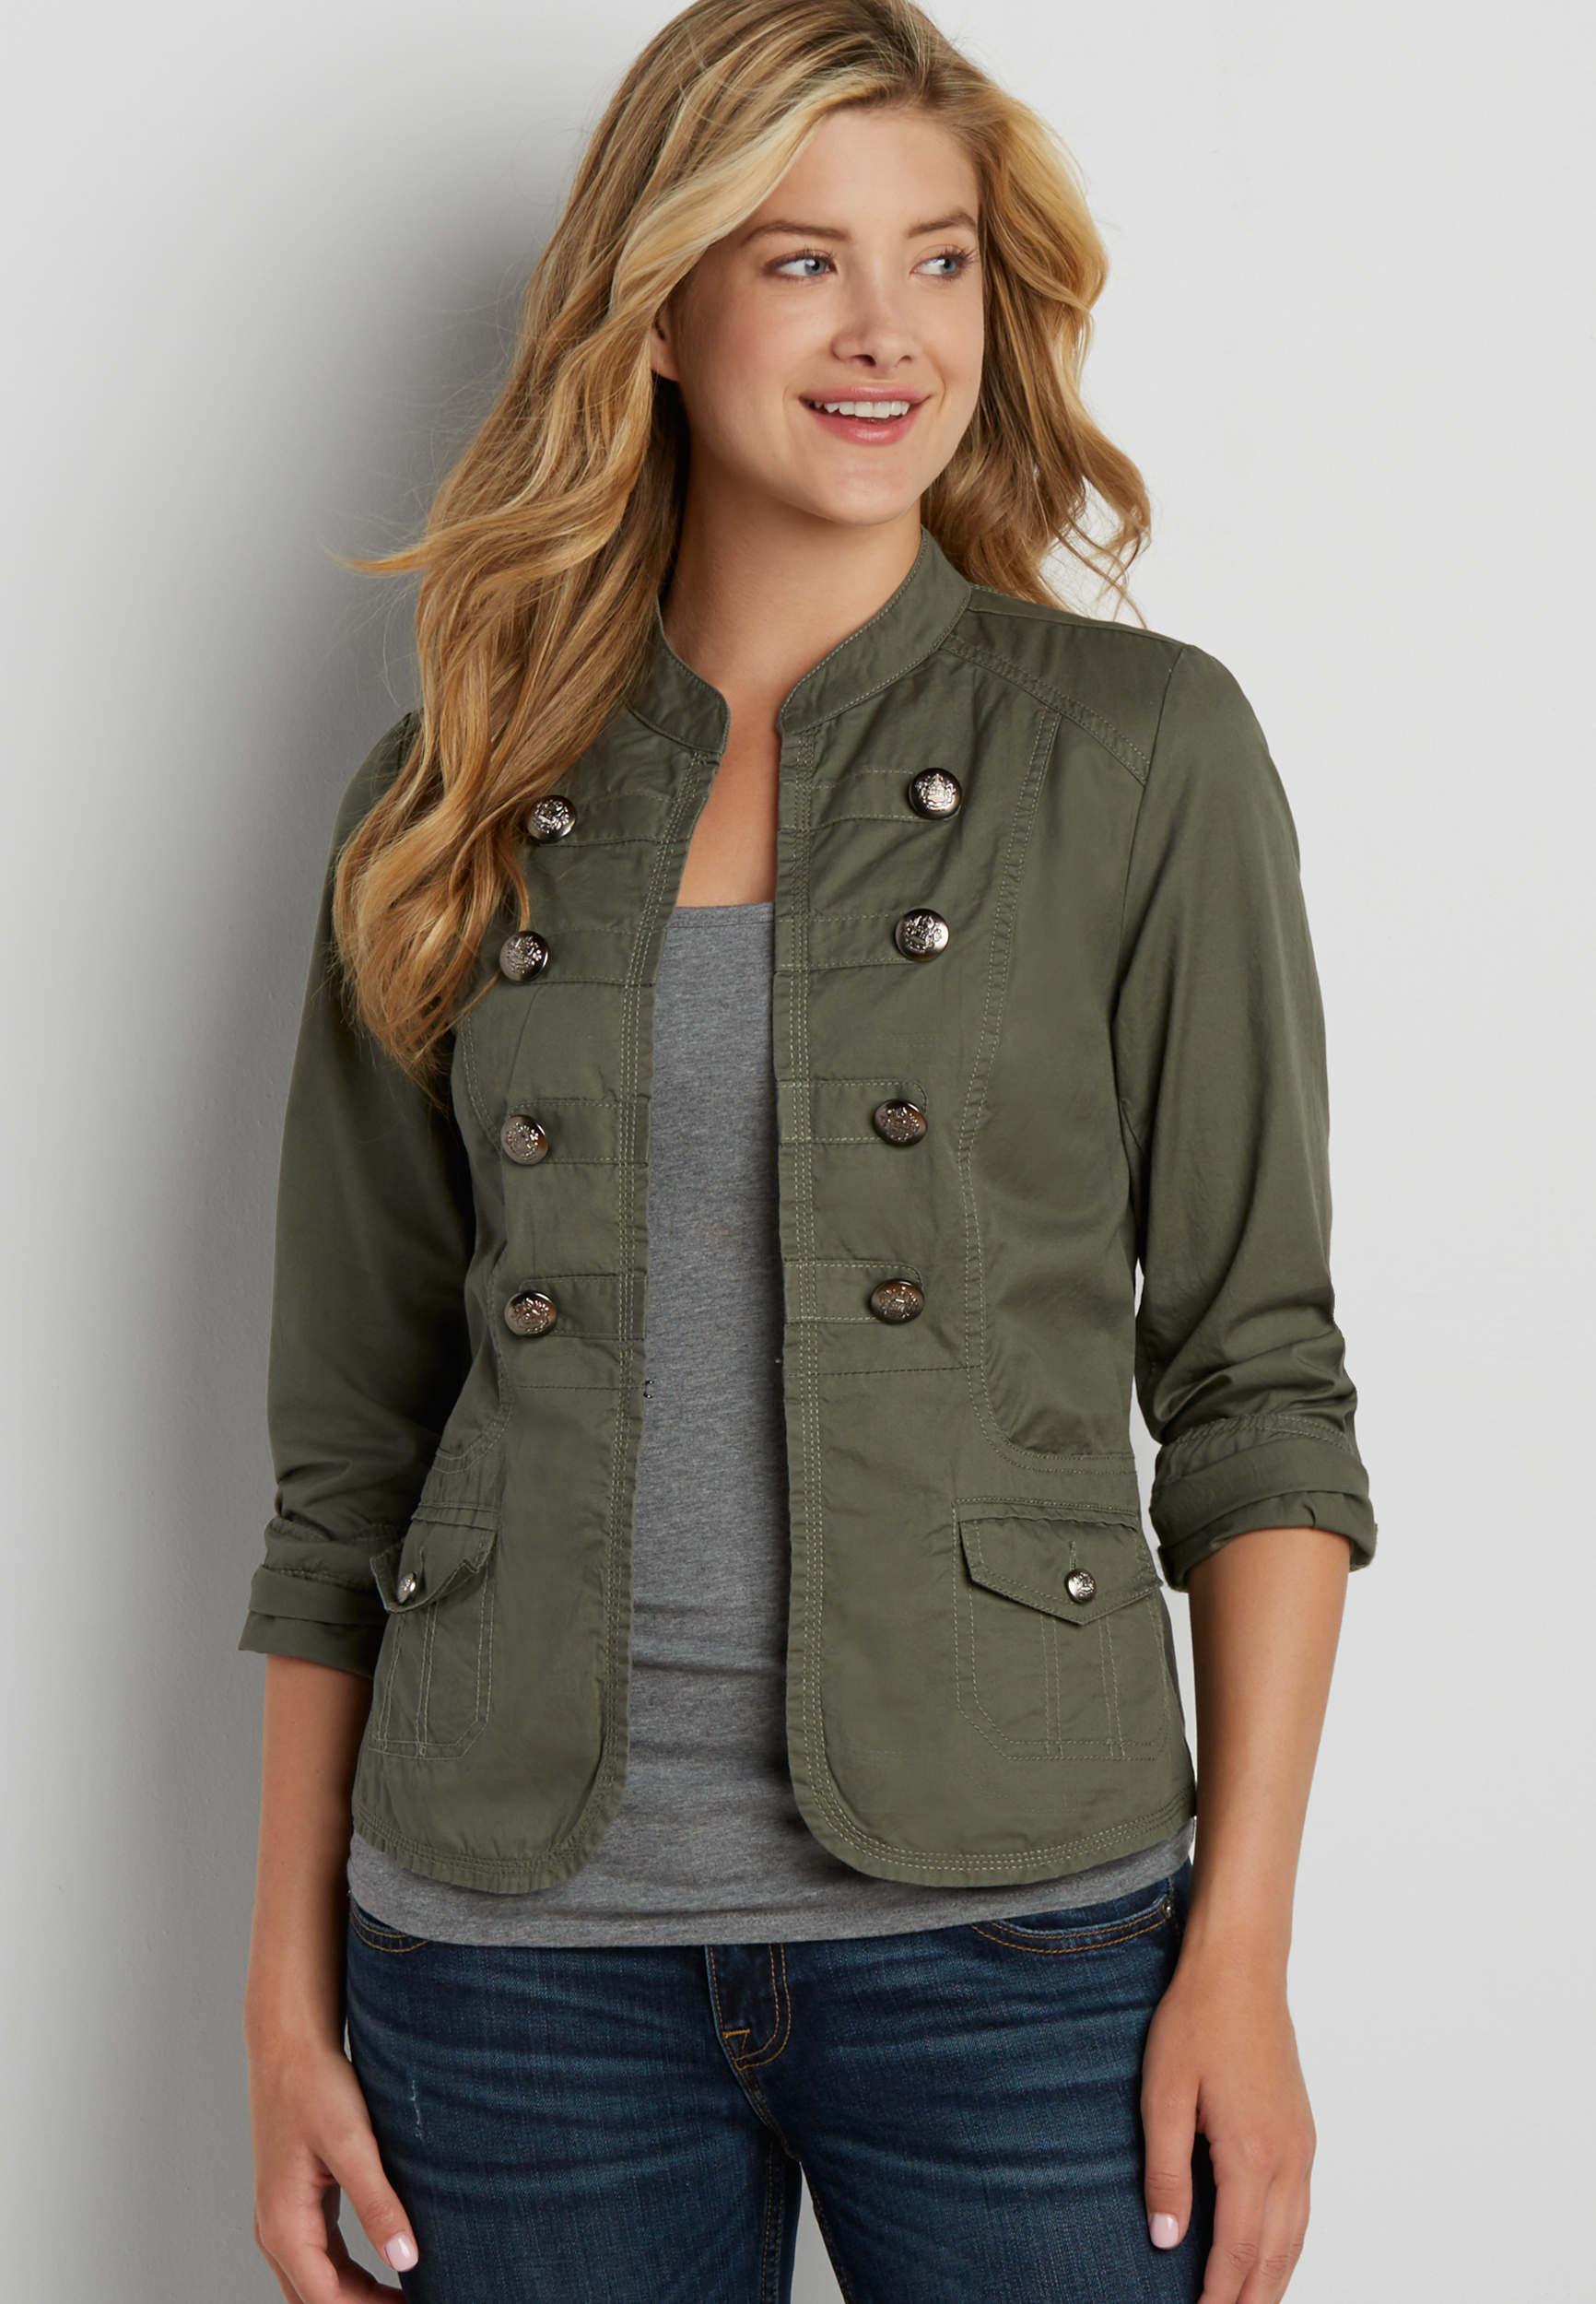 military blazer in olive green | maurices